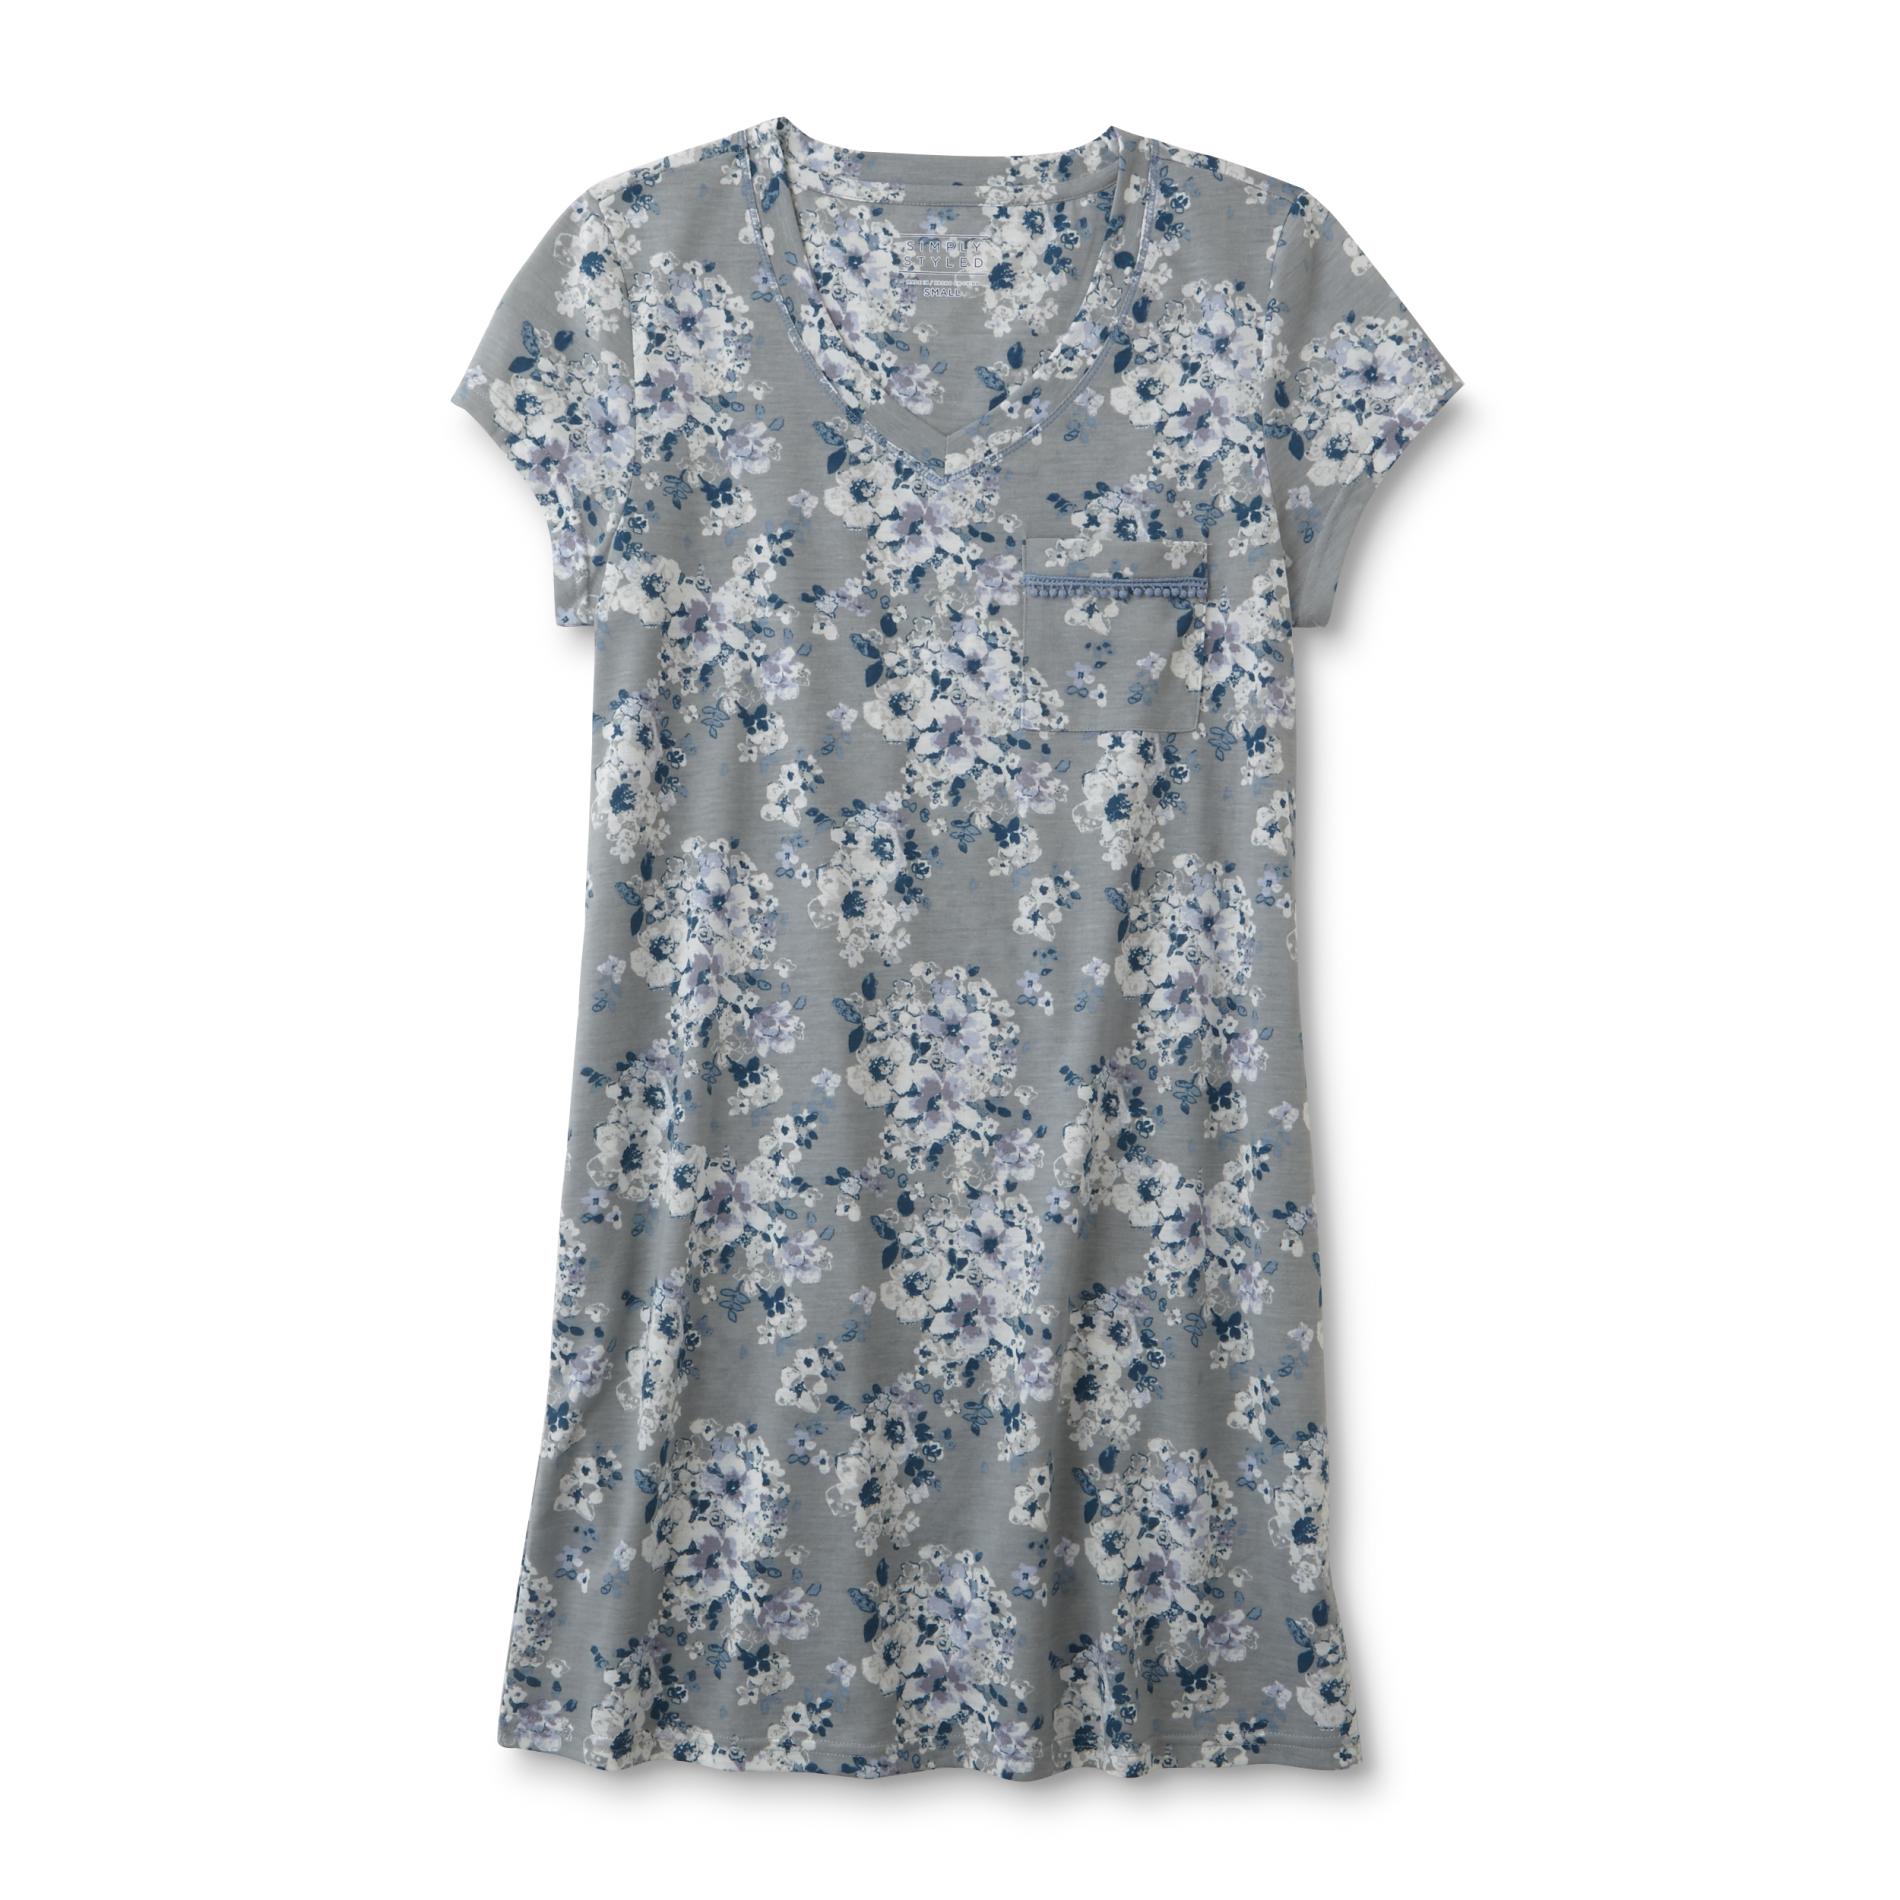 Simply Styled Women's Nightgown - Floral